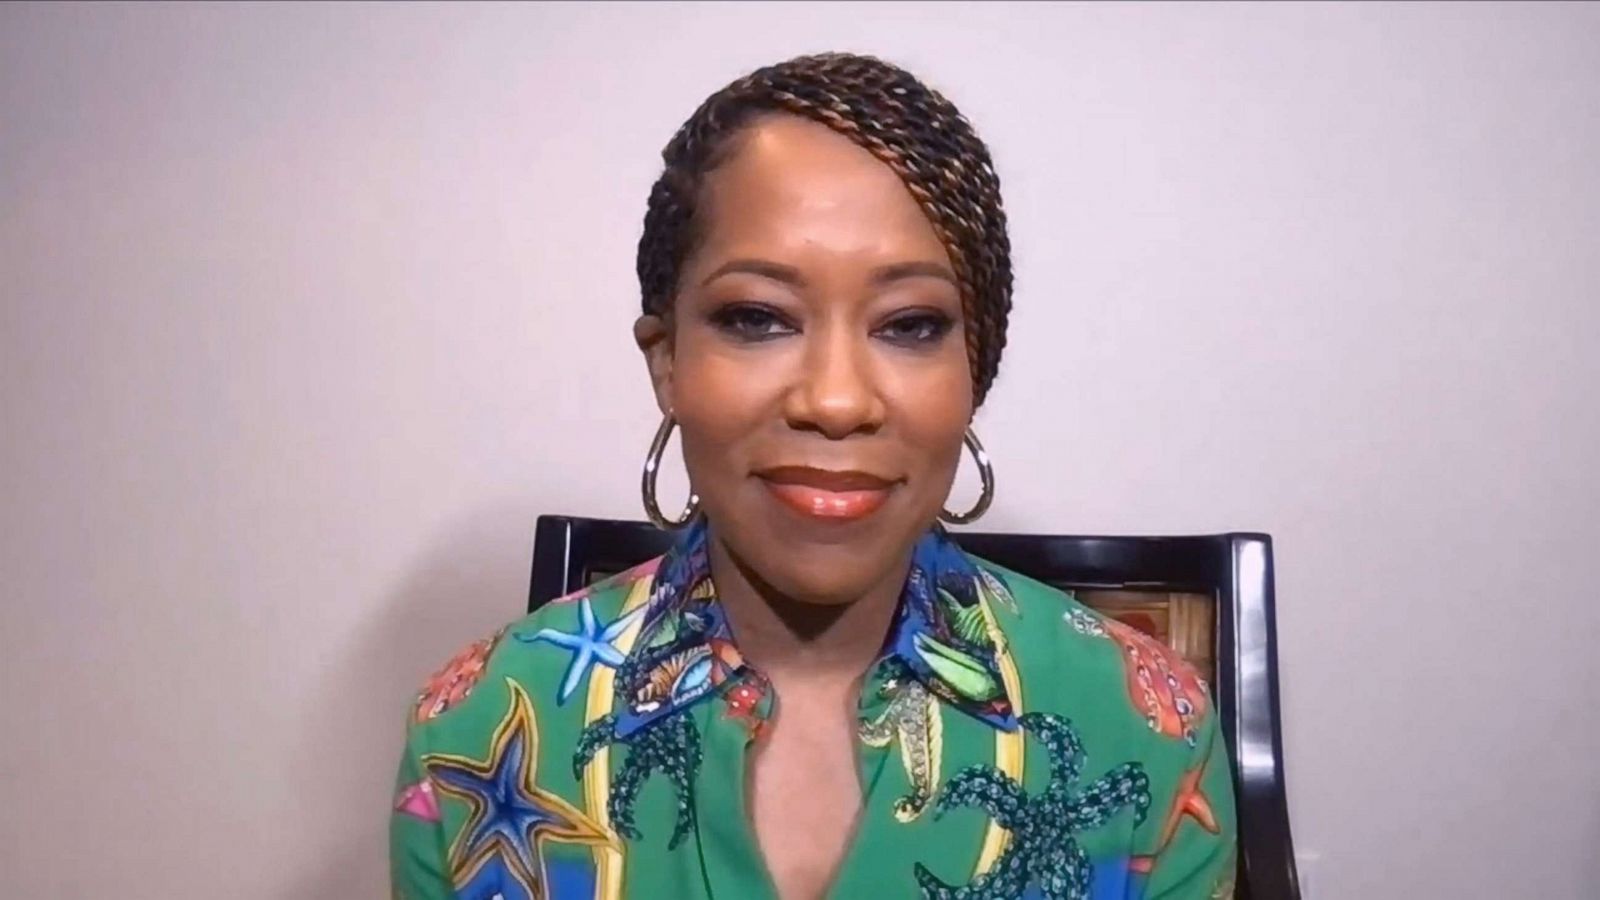 Regina King Will Host a One Night in Miami 'Watch Party' on 50th Birthday